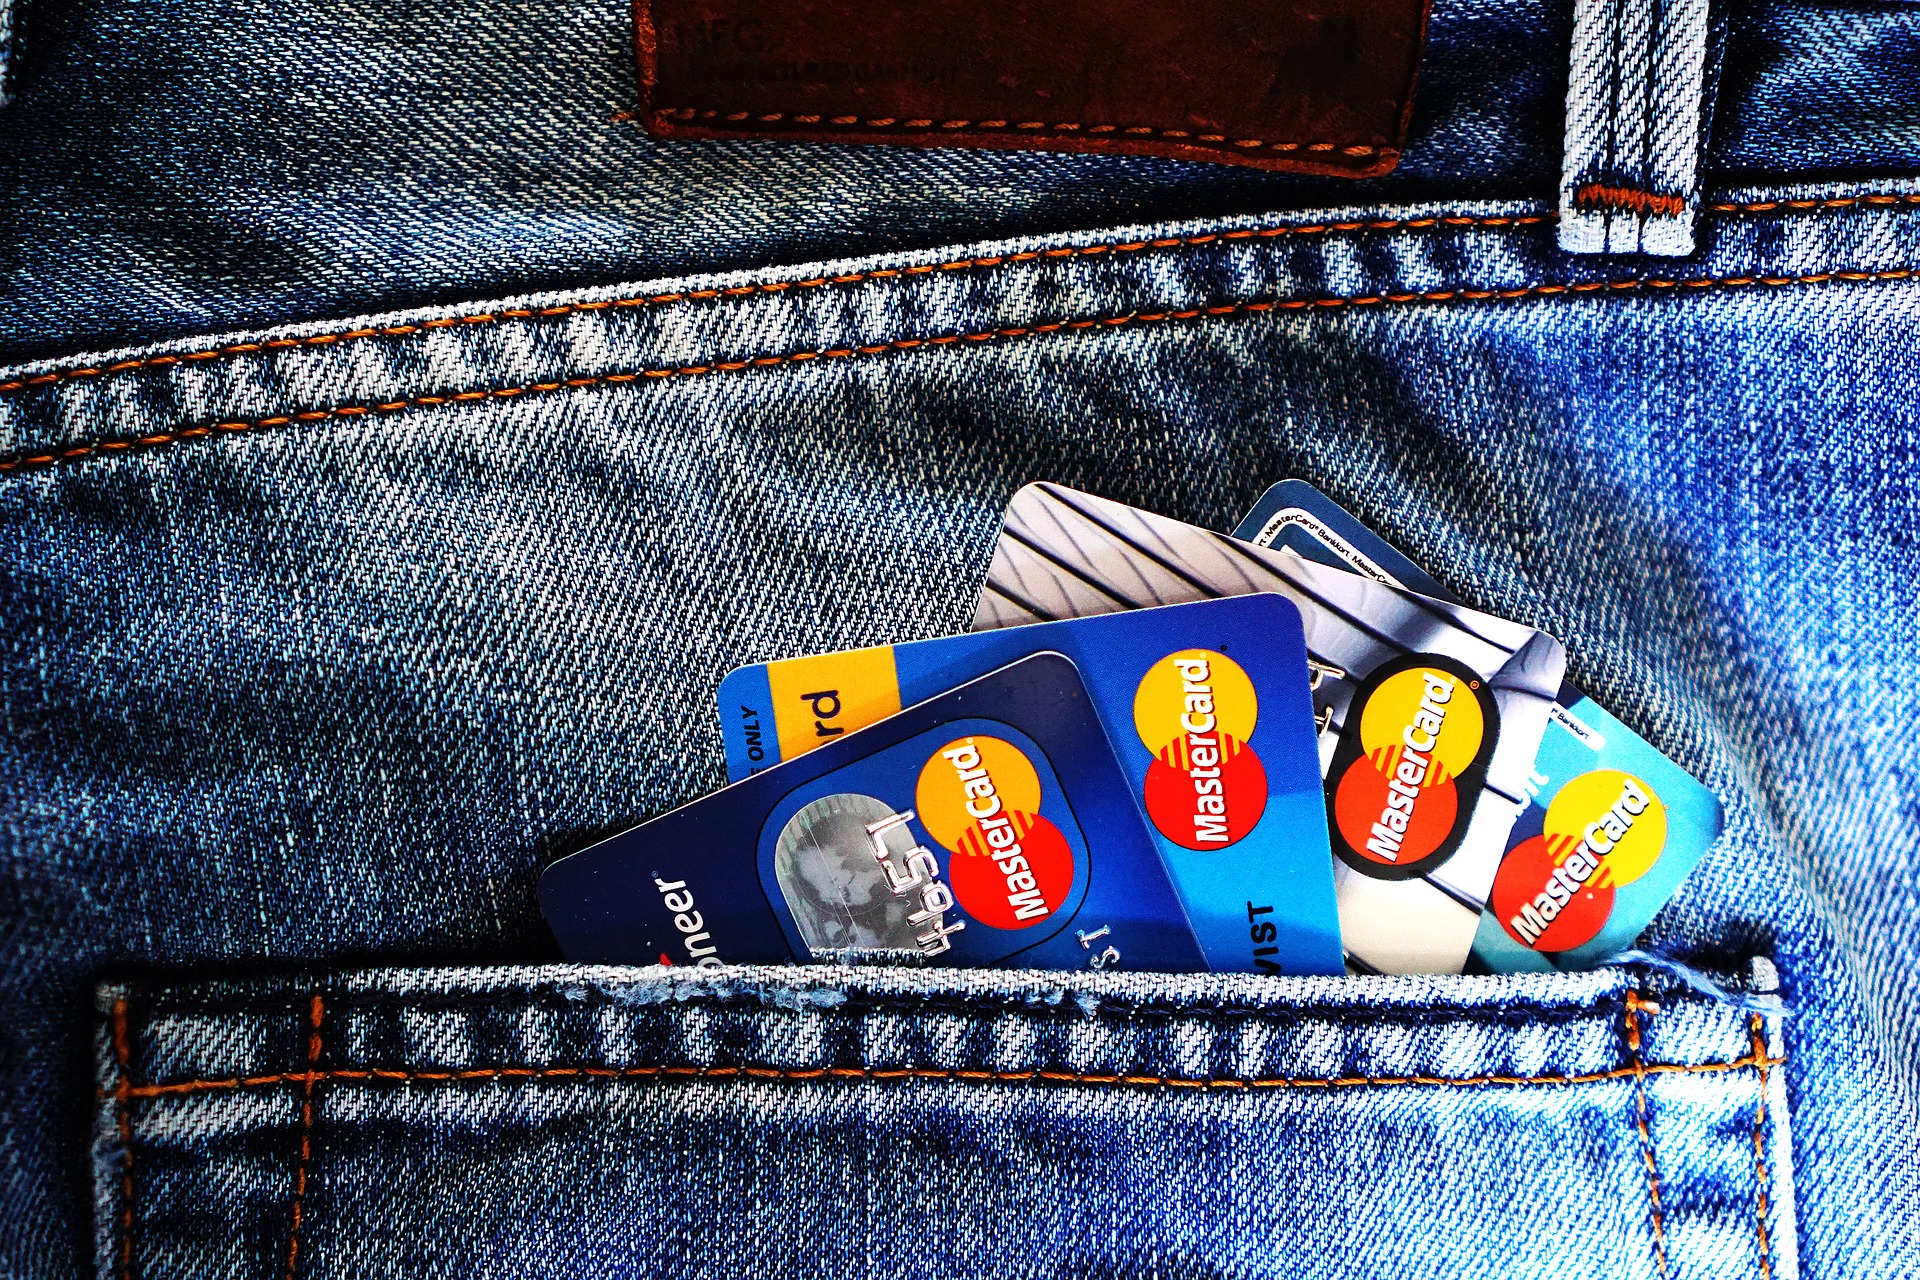 5 Tips to Avoid Credit Card Fraud and Scams on Vacations